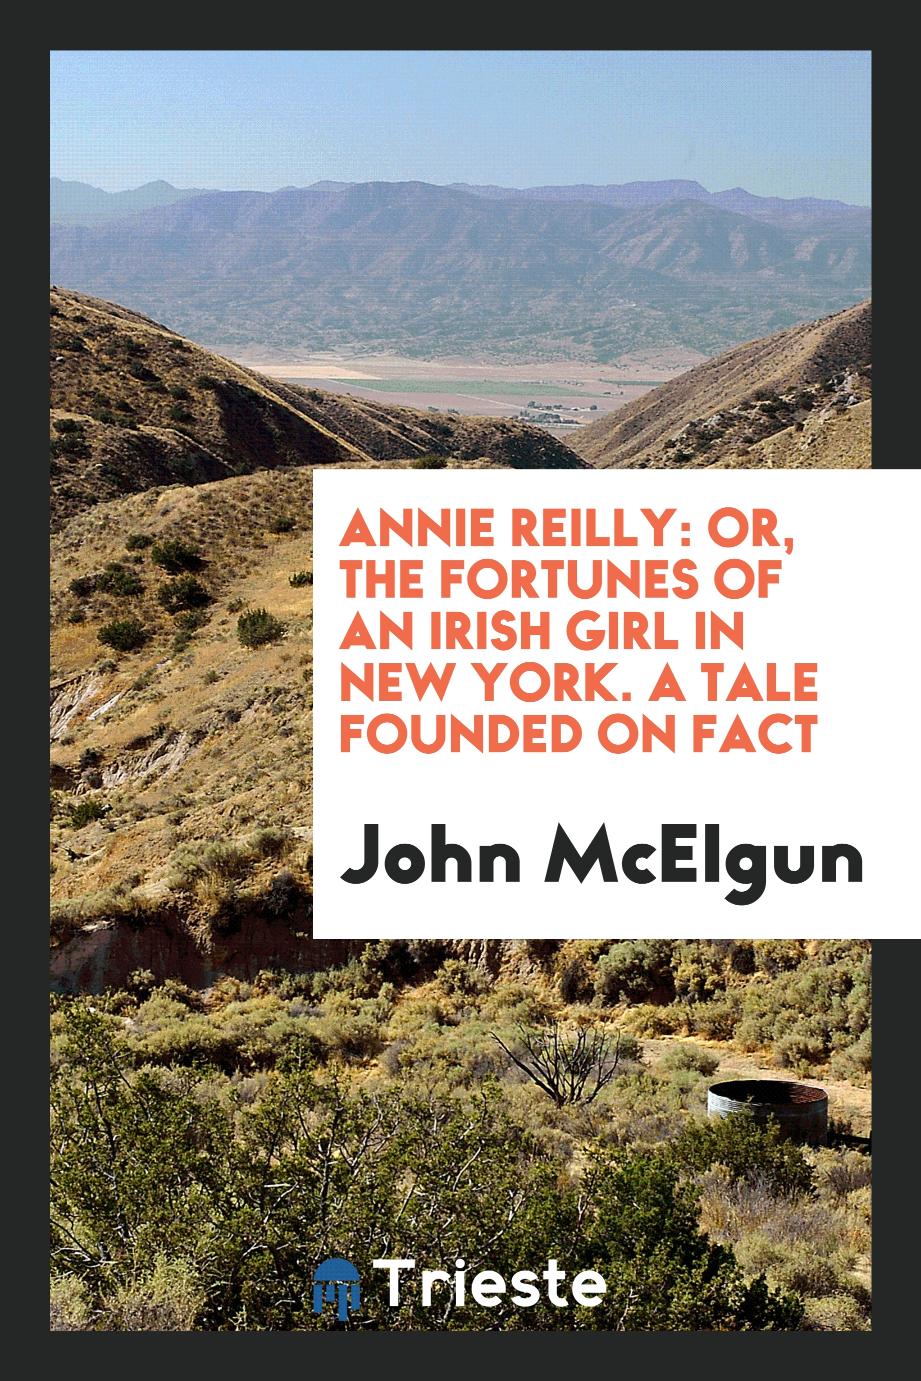 Annie Reilly: Or, the Fortunes of an Irish Girl in New York. A Tale Founded on Fact